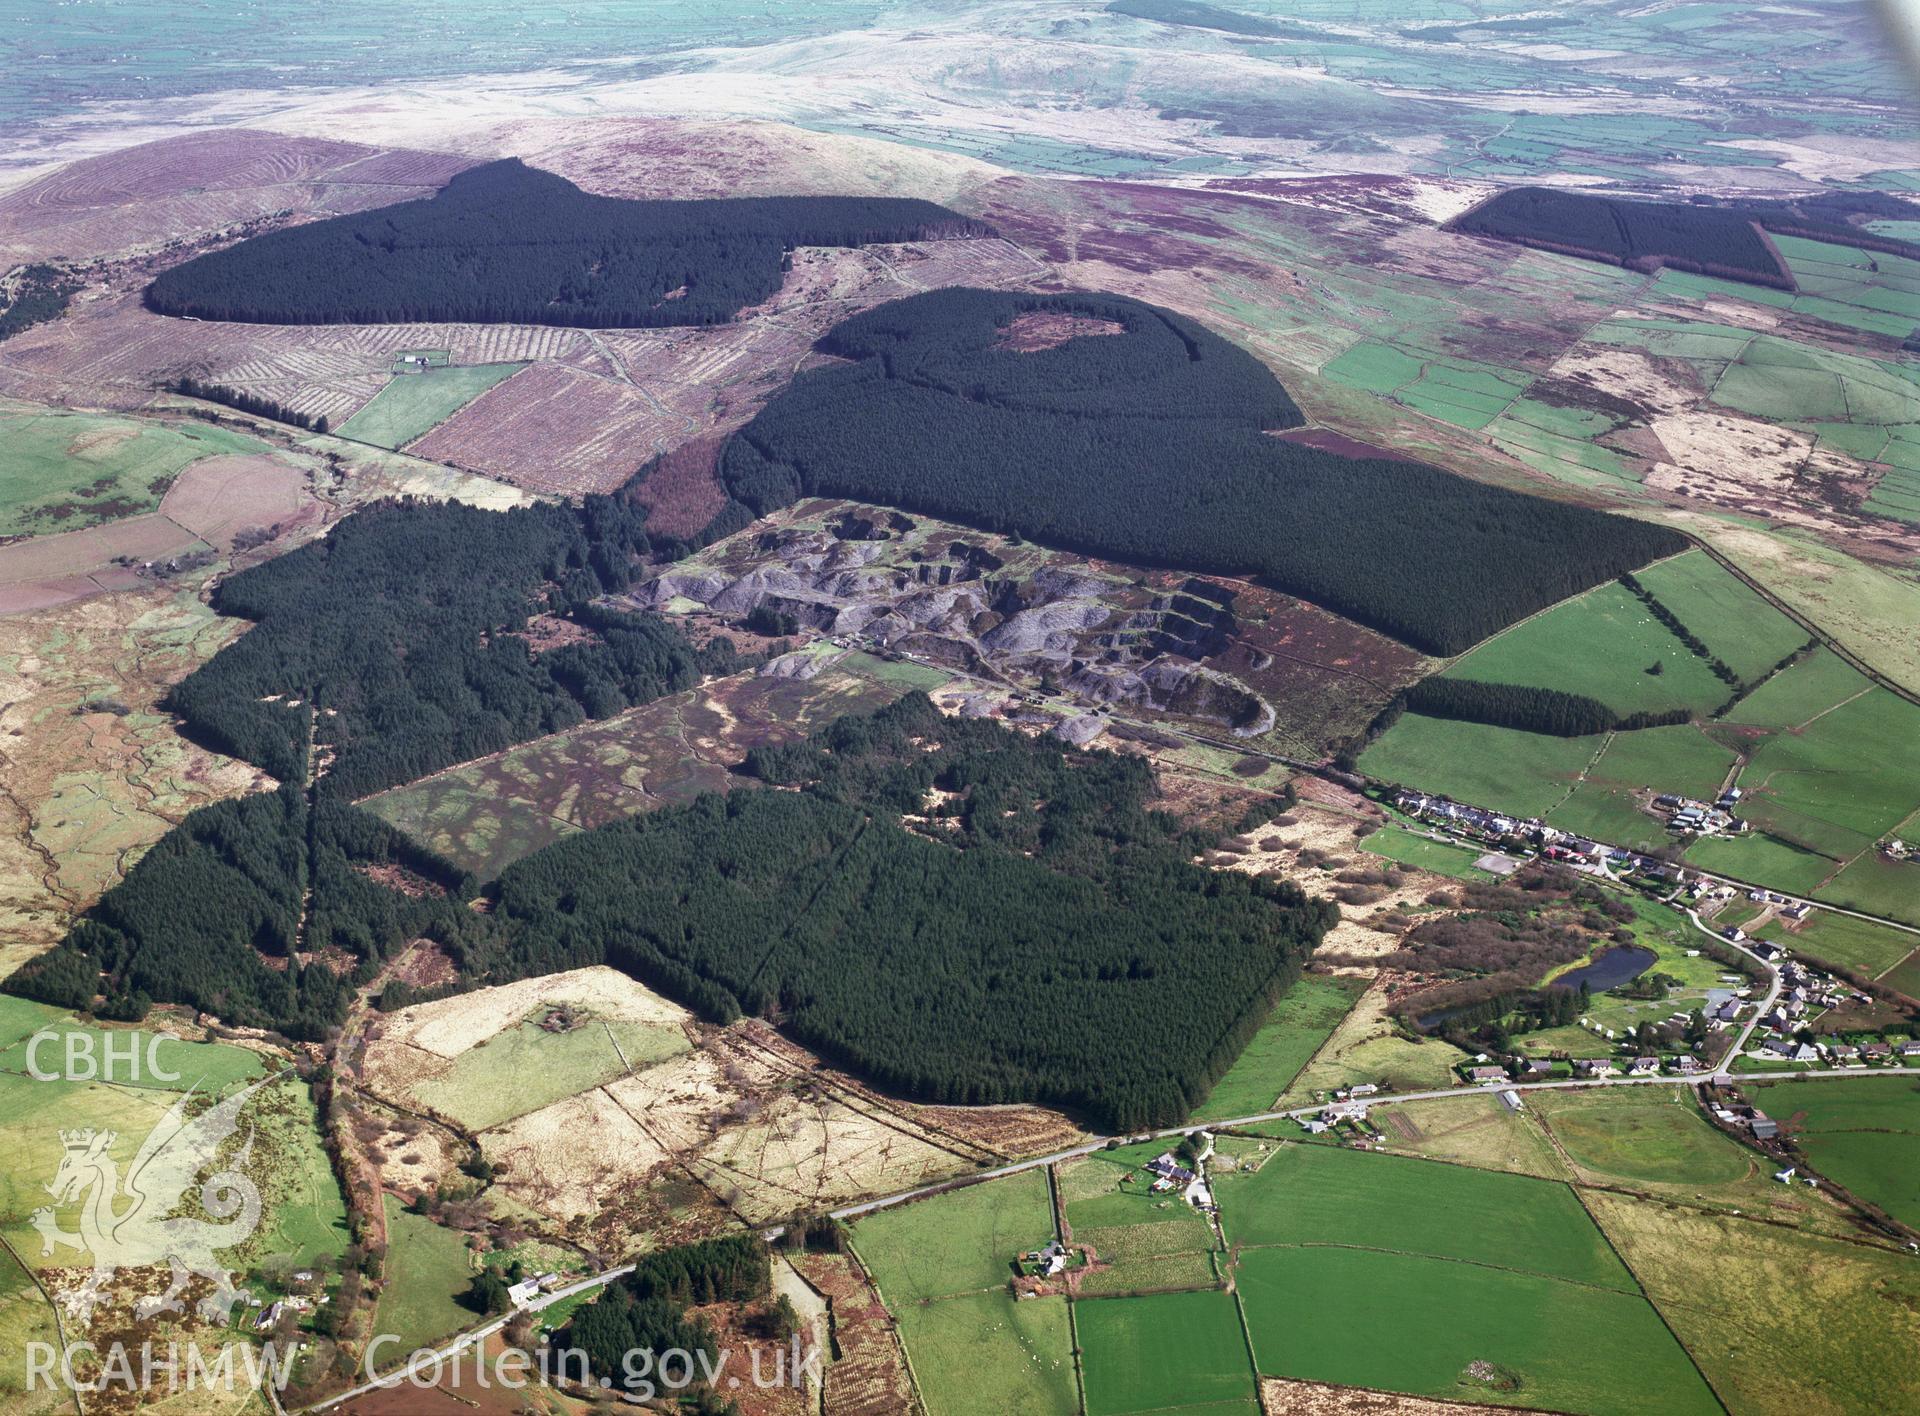 RCAHMW colour aerial photograph of Rosebush Quarry, taken by Toby Driver, 2002